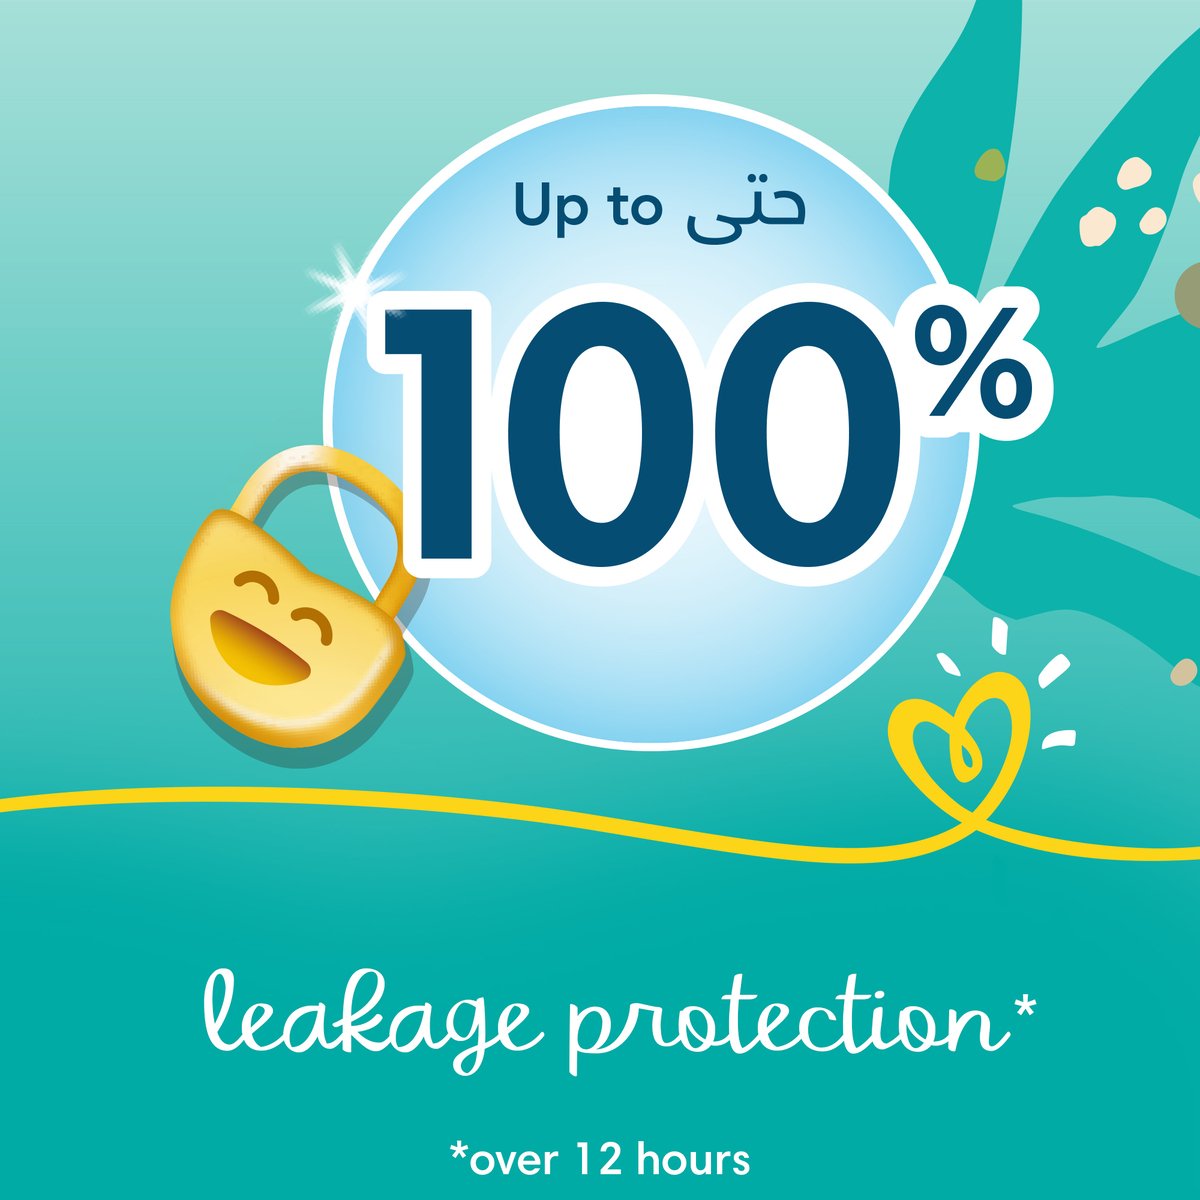 Pampers Baby-Dry Diapers with Aloe Vera Lotion and Leakage Protection Size 7, 15+ kg, 56pcs